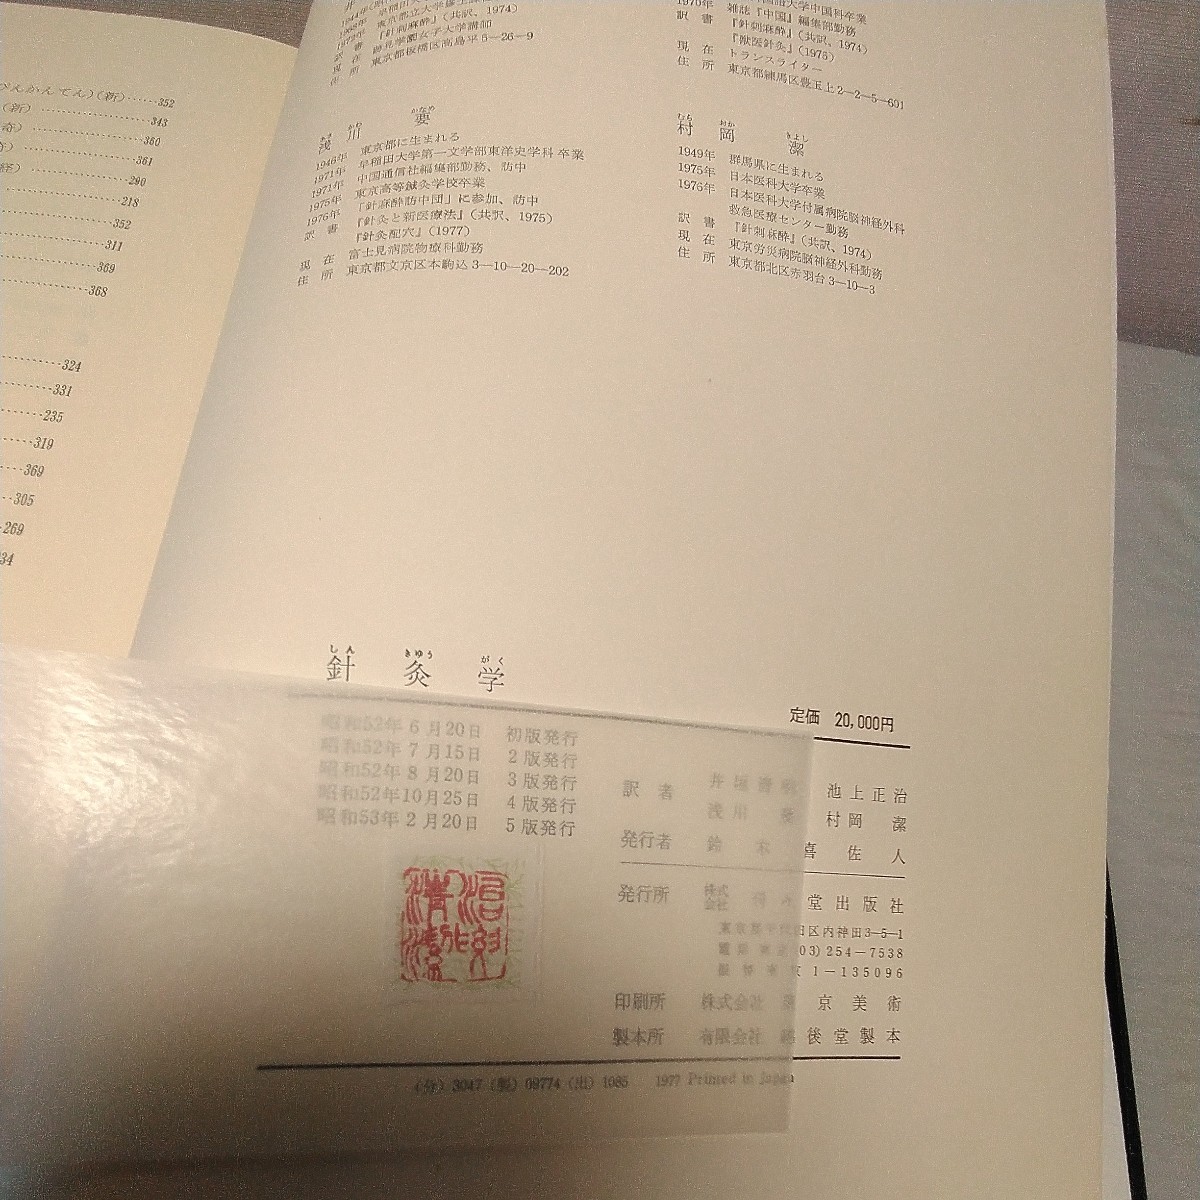  needle moxibustion . all one volume on sea middle medicine . compilation ... publish company boxed large book@ Oriental medicine medical care therapia 